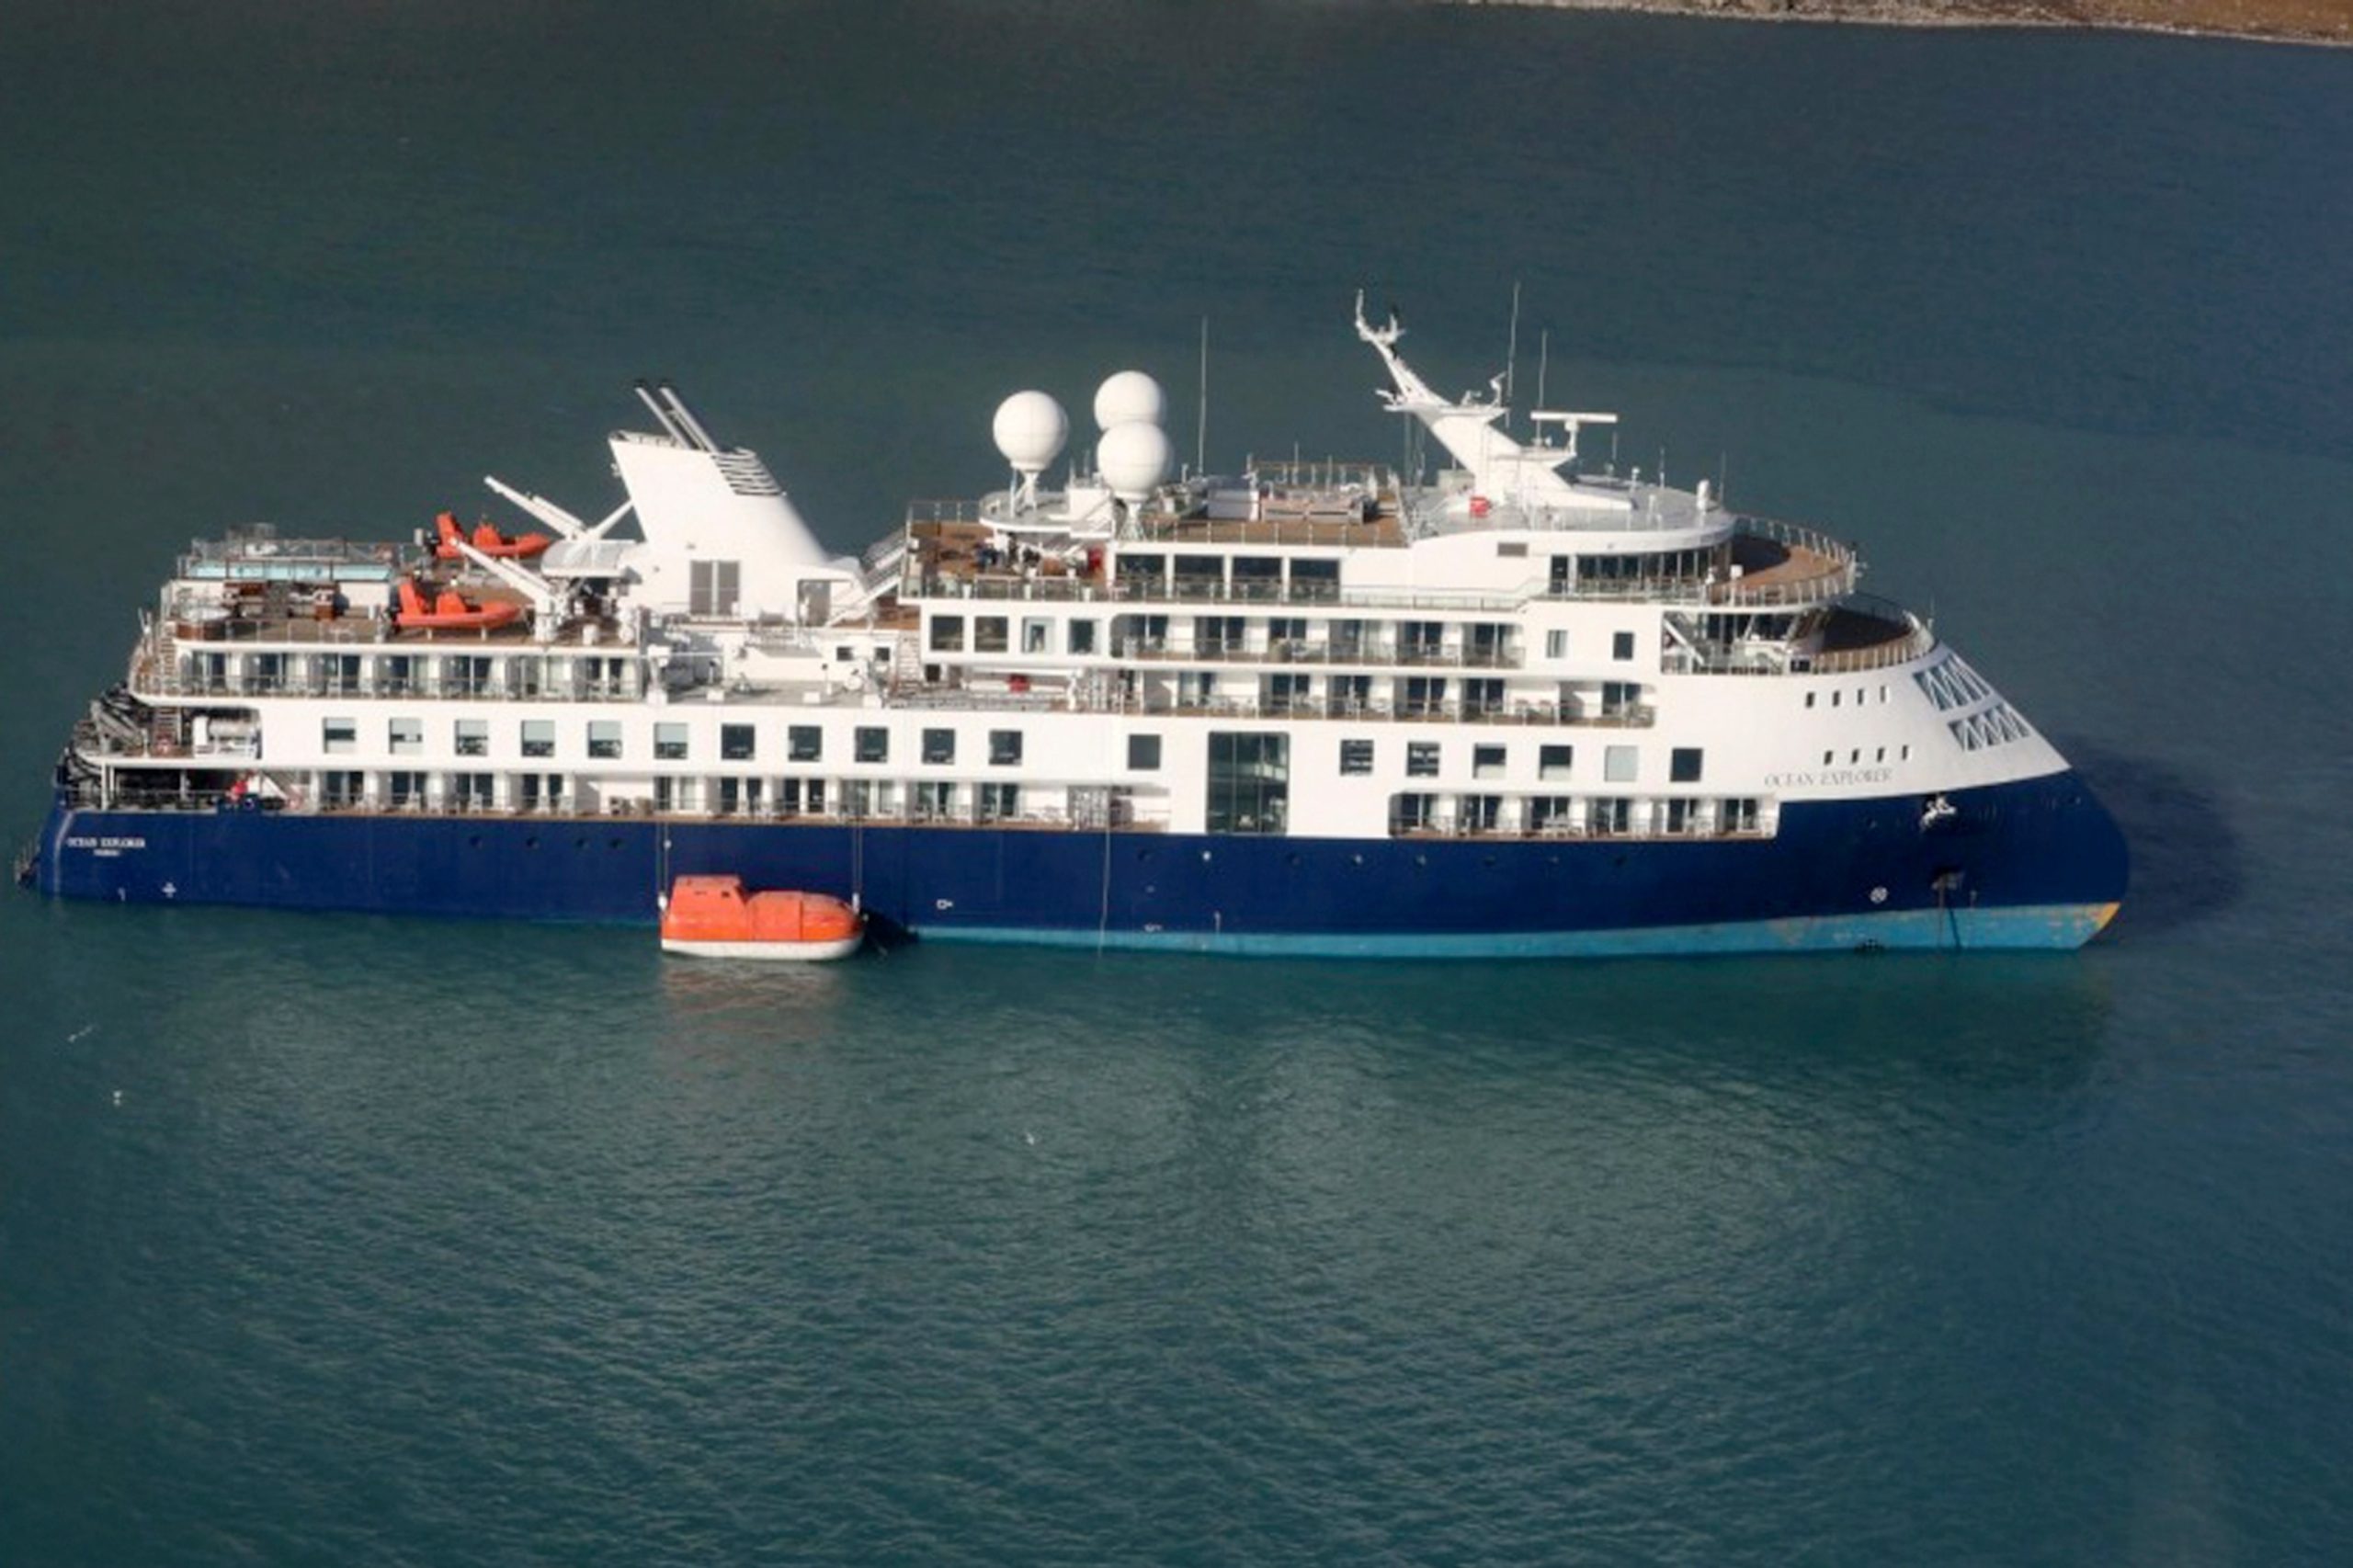 Rescue Operations Initiated as Luxury Cruise Ship Carrying 206 Passengers Runs Aground